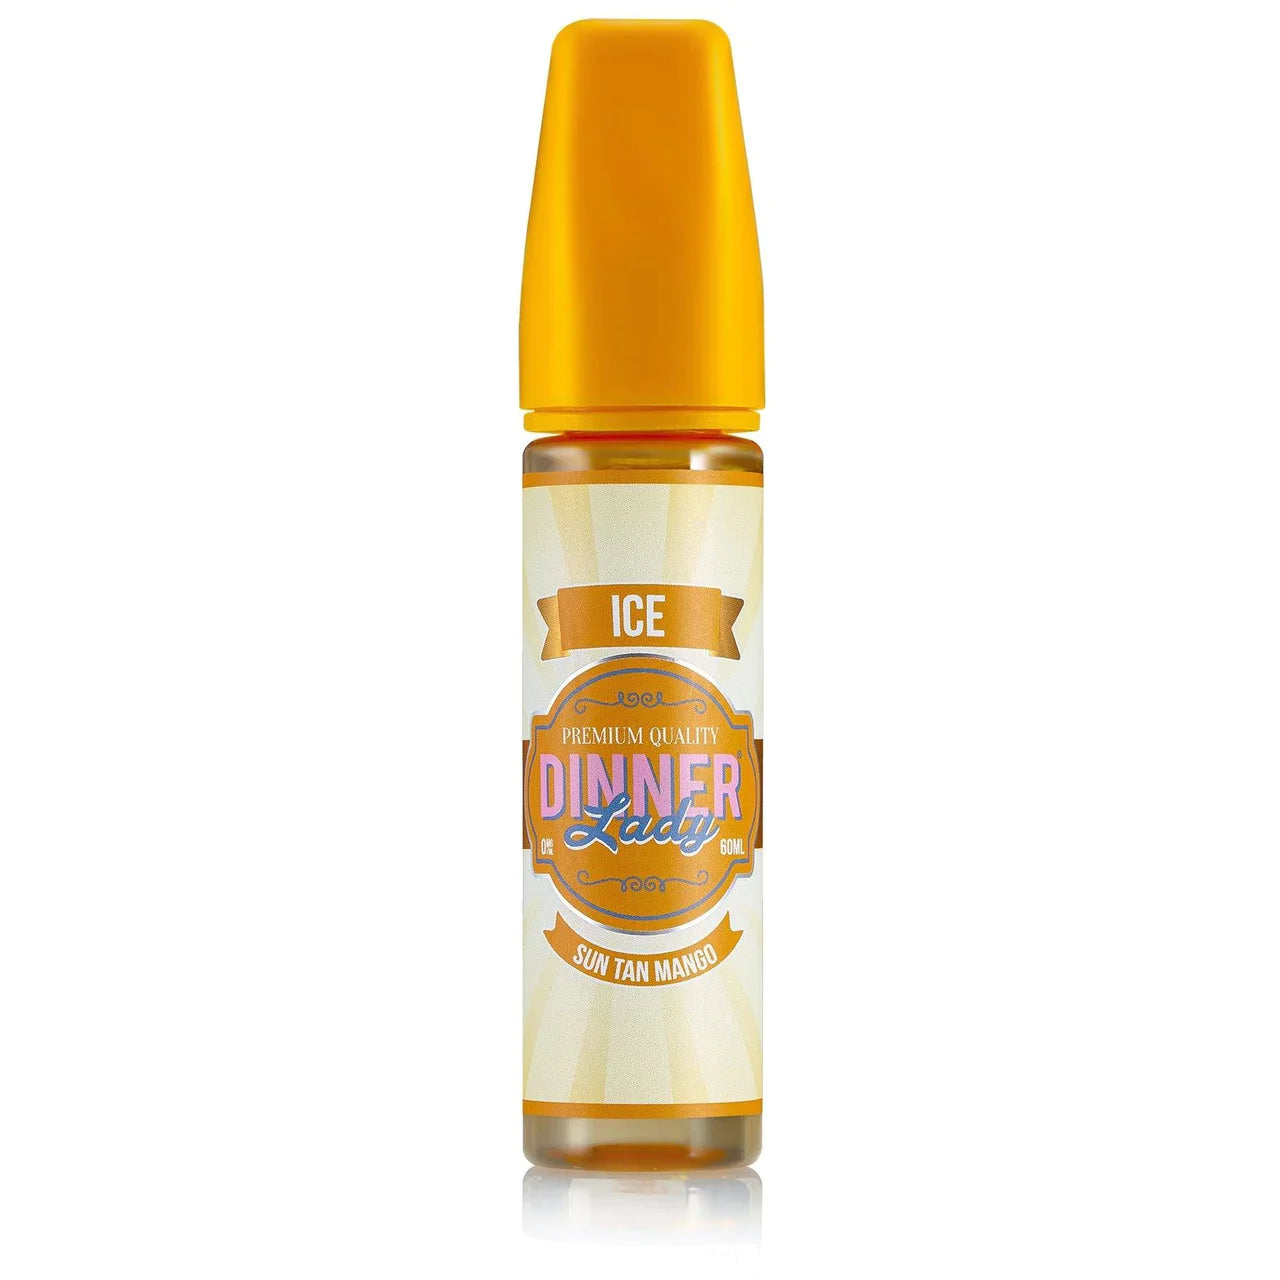 Buy Sun Tan Mango Ice by Dinner Lady - Wick and Wire Co Melbourne Vape Shop, Victoria Australia